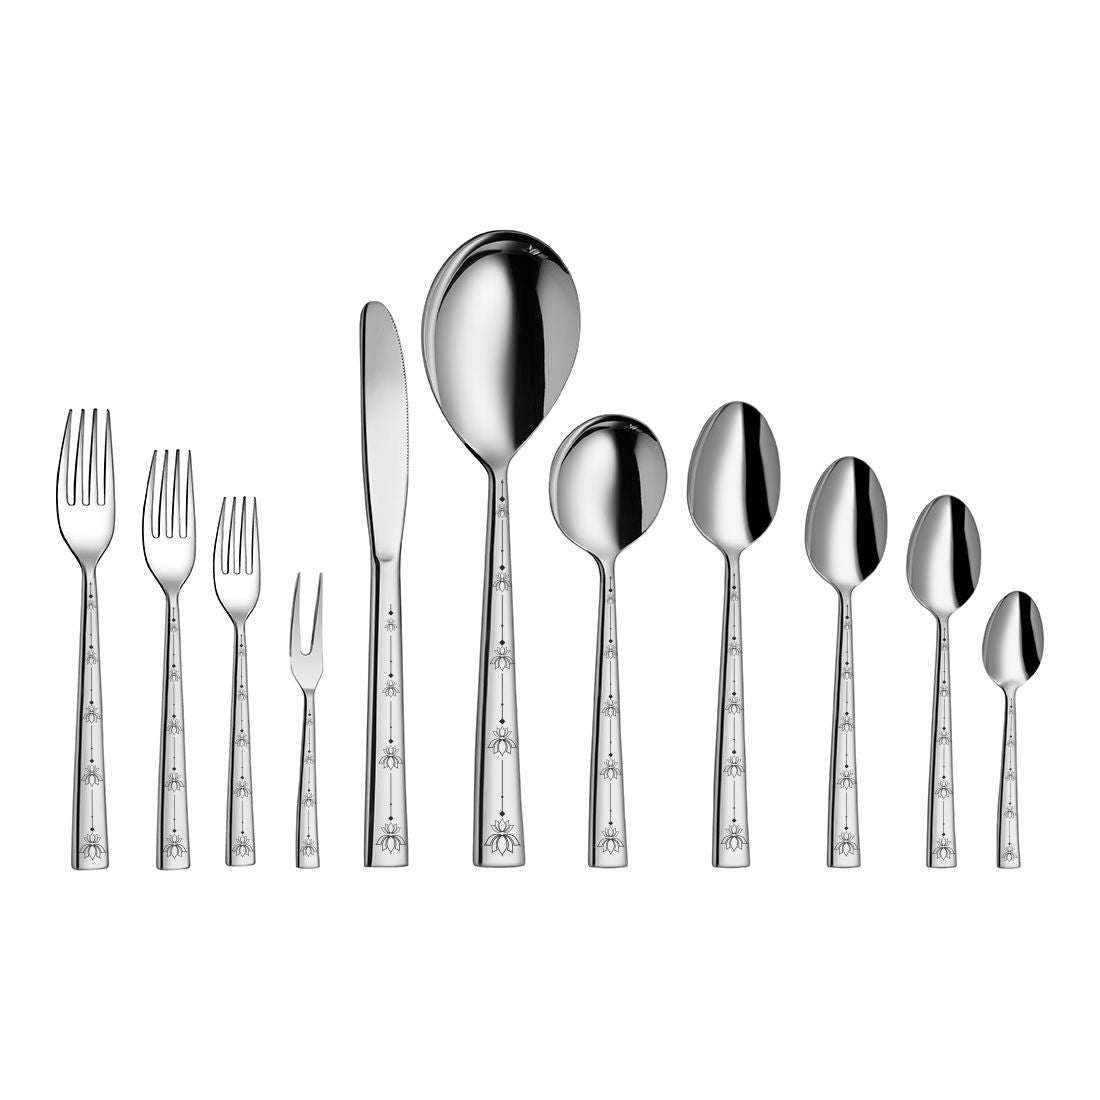 Stainless Steel Cutlery with Laser Lotus Plain